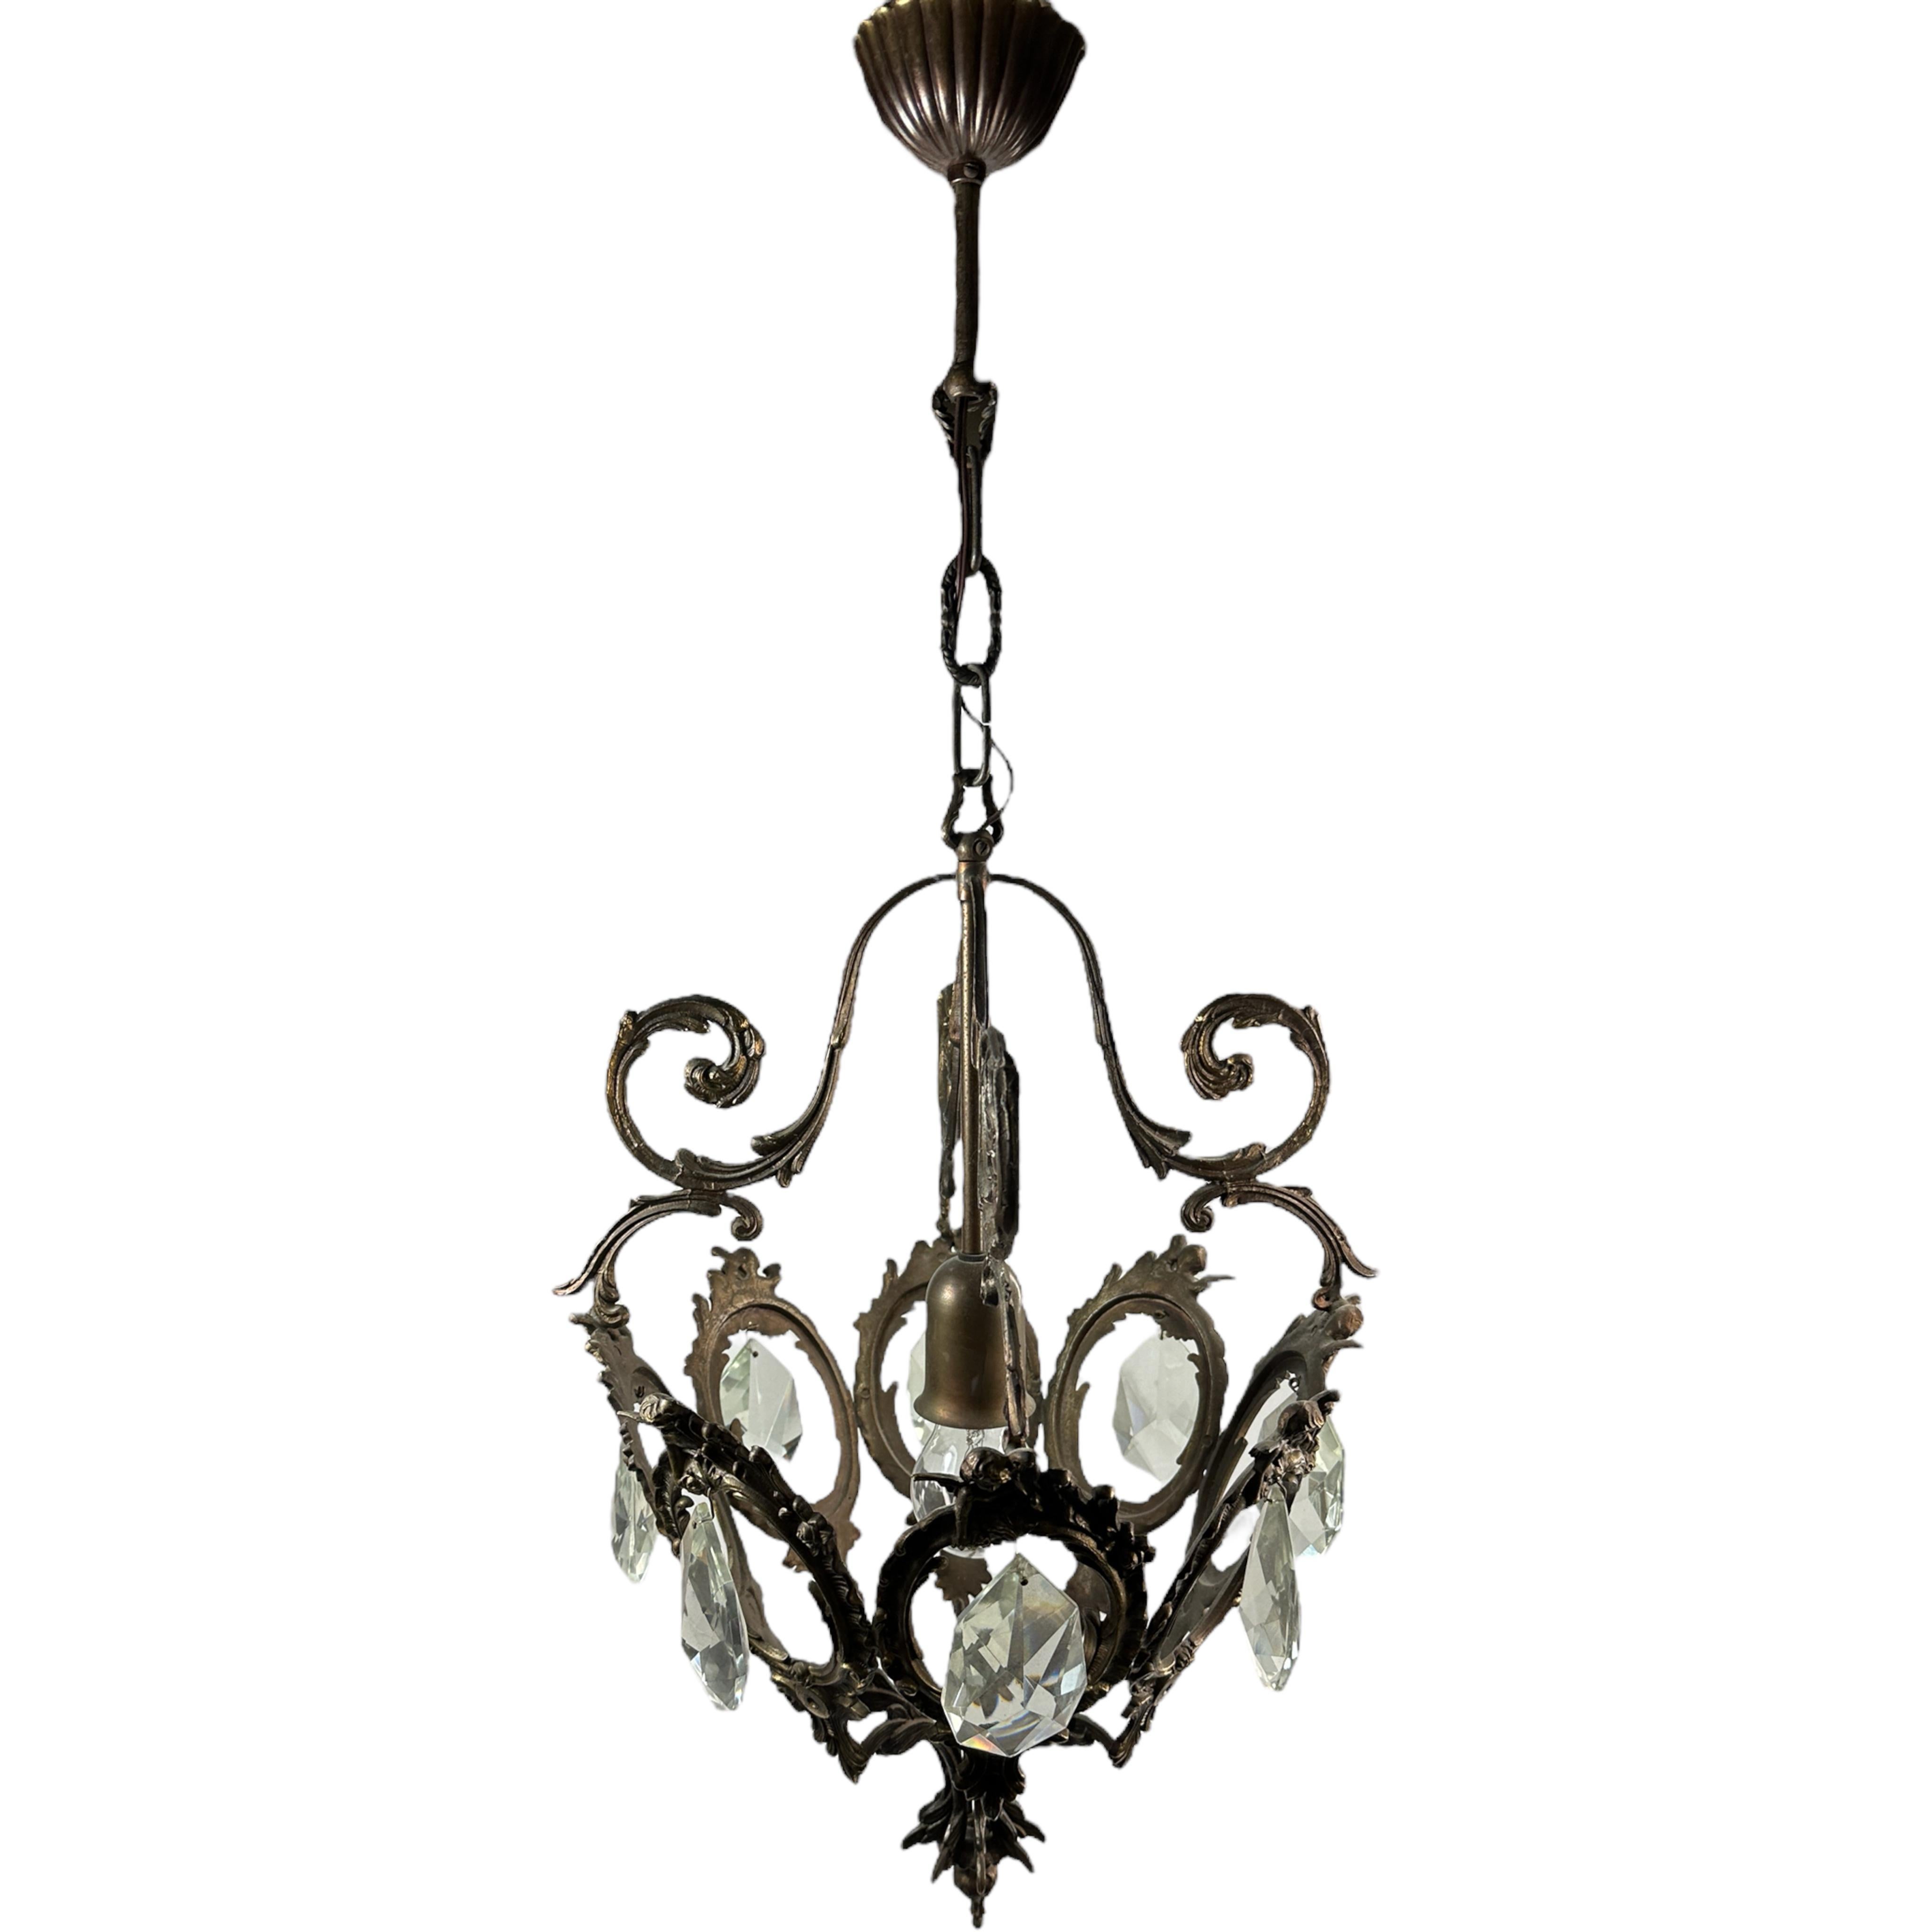 A beautiful iron and crystal lantern chandelier in the style of the prestigious Maison Baguès.
One light handmade bronzed metal with crystal stones, beautiful piece of art.
The Fixture requires one European E27 / 110 Volt Edison bulb, up to 60